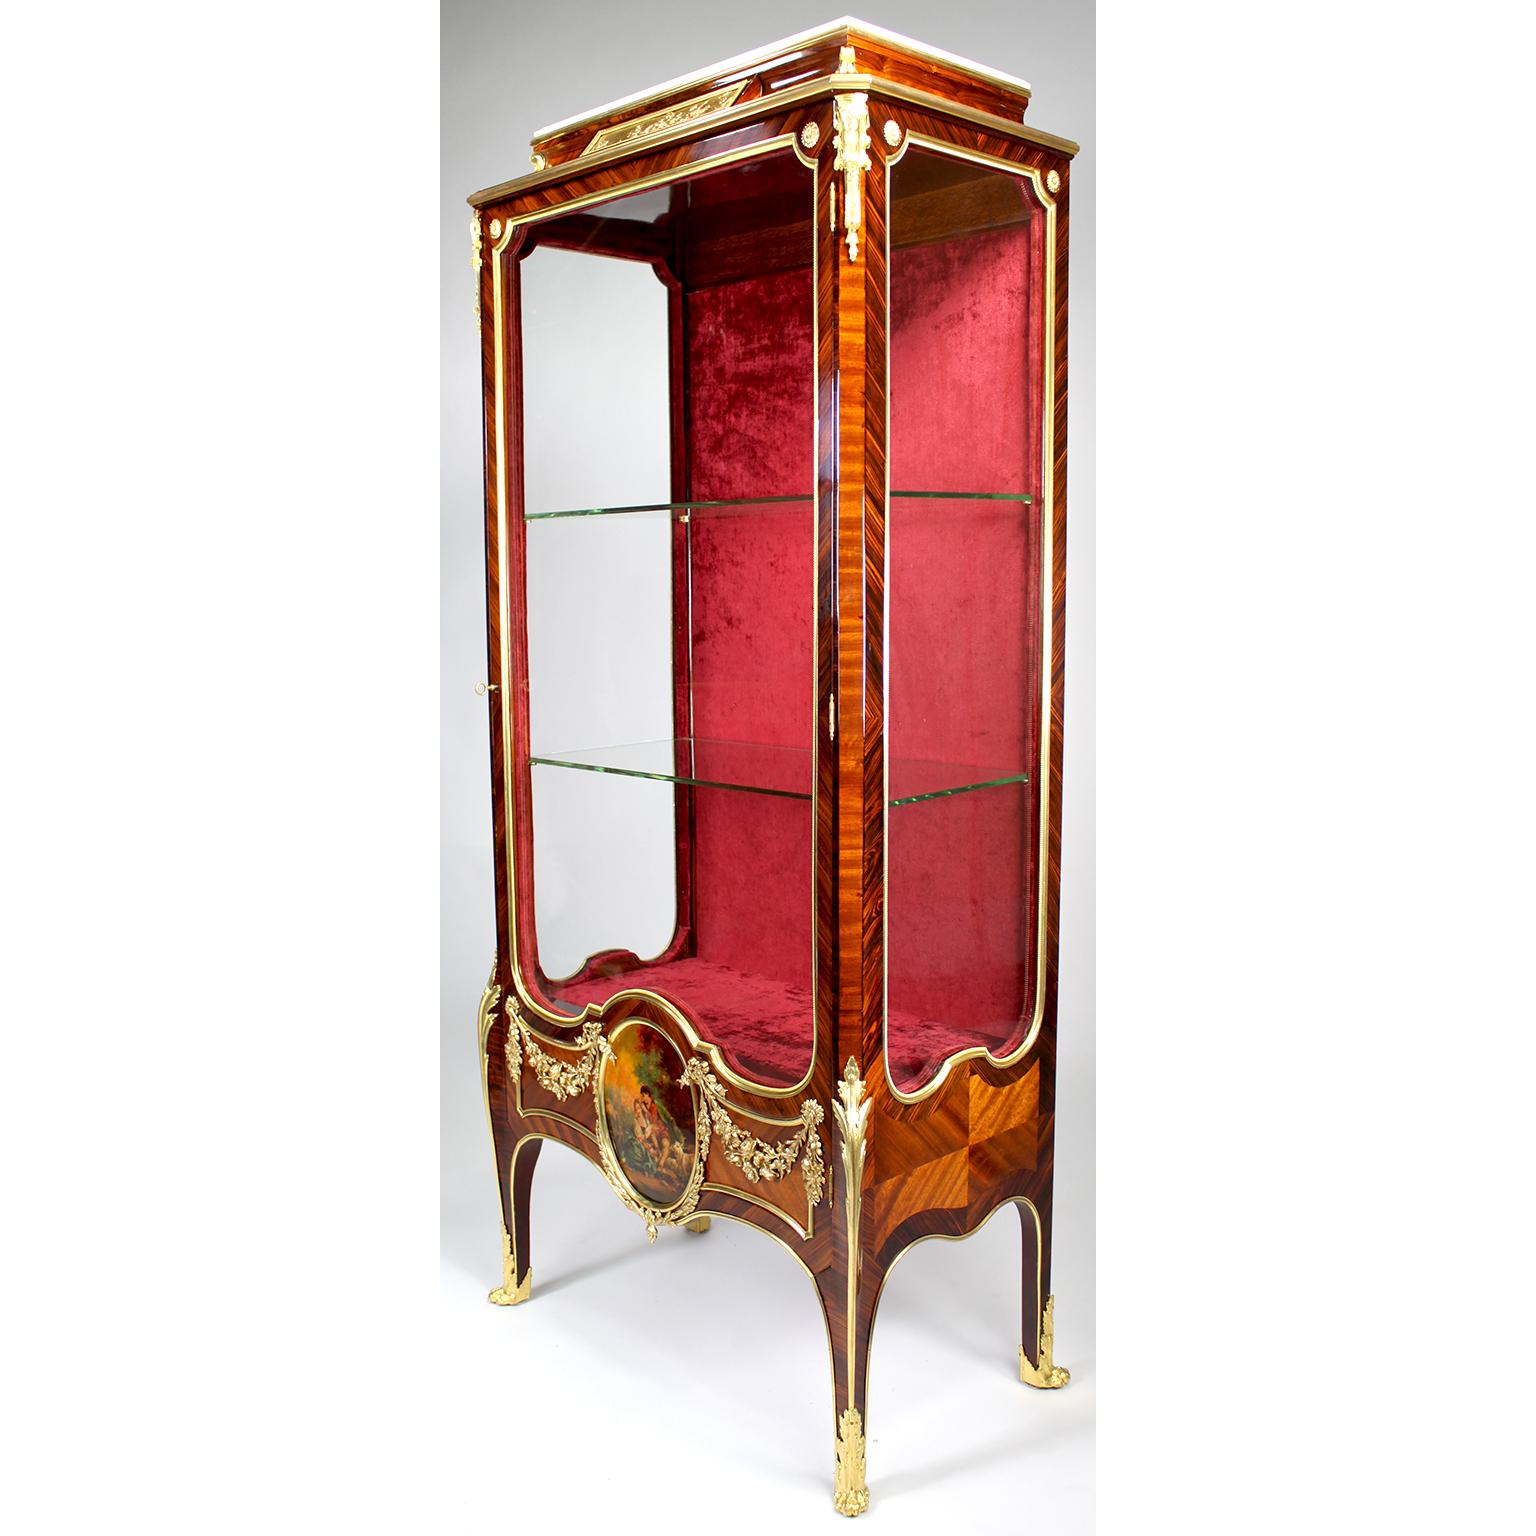 A very fine French 19th century Louis XV style Ormolu Mounted Kingwood, Satinwood and Vernis Martin Decorated Single-Door Vitrine, probably by François Linke (1855-1946). The white marble top structure centered with an allegorical gilt-bronze plaque